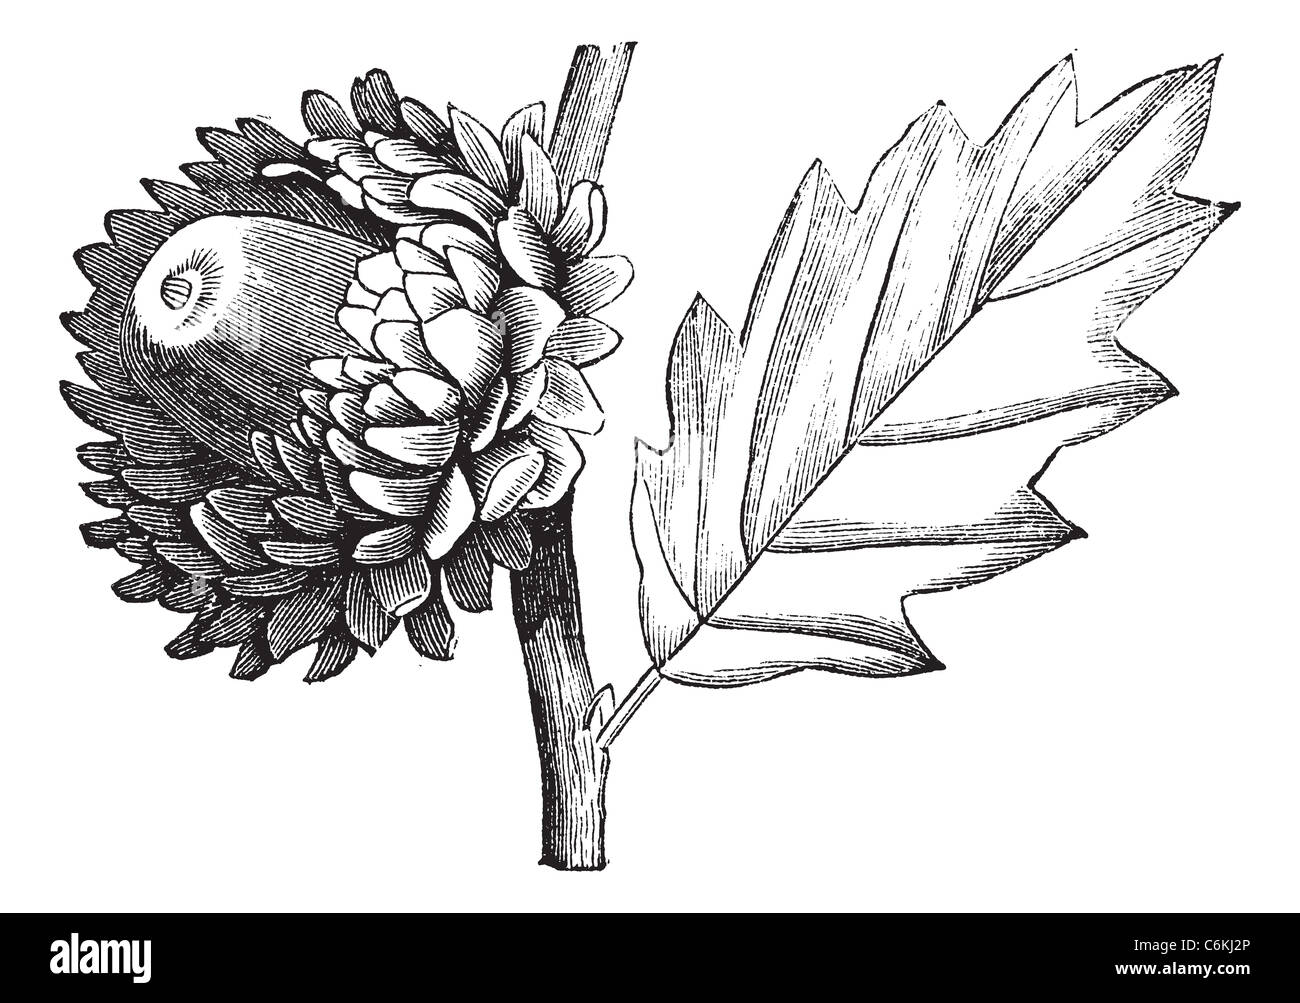 Valonia Oak or Quercus macrolepis, vintage engraving. Old engraved illustration of Valonia Oak showing flower with cup-shaped Stock Photo